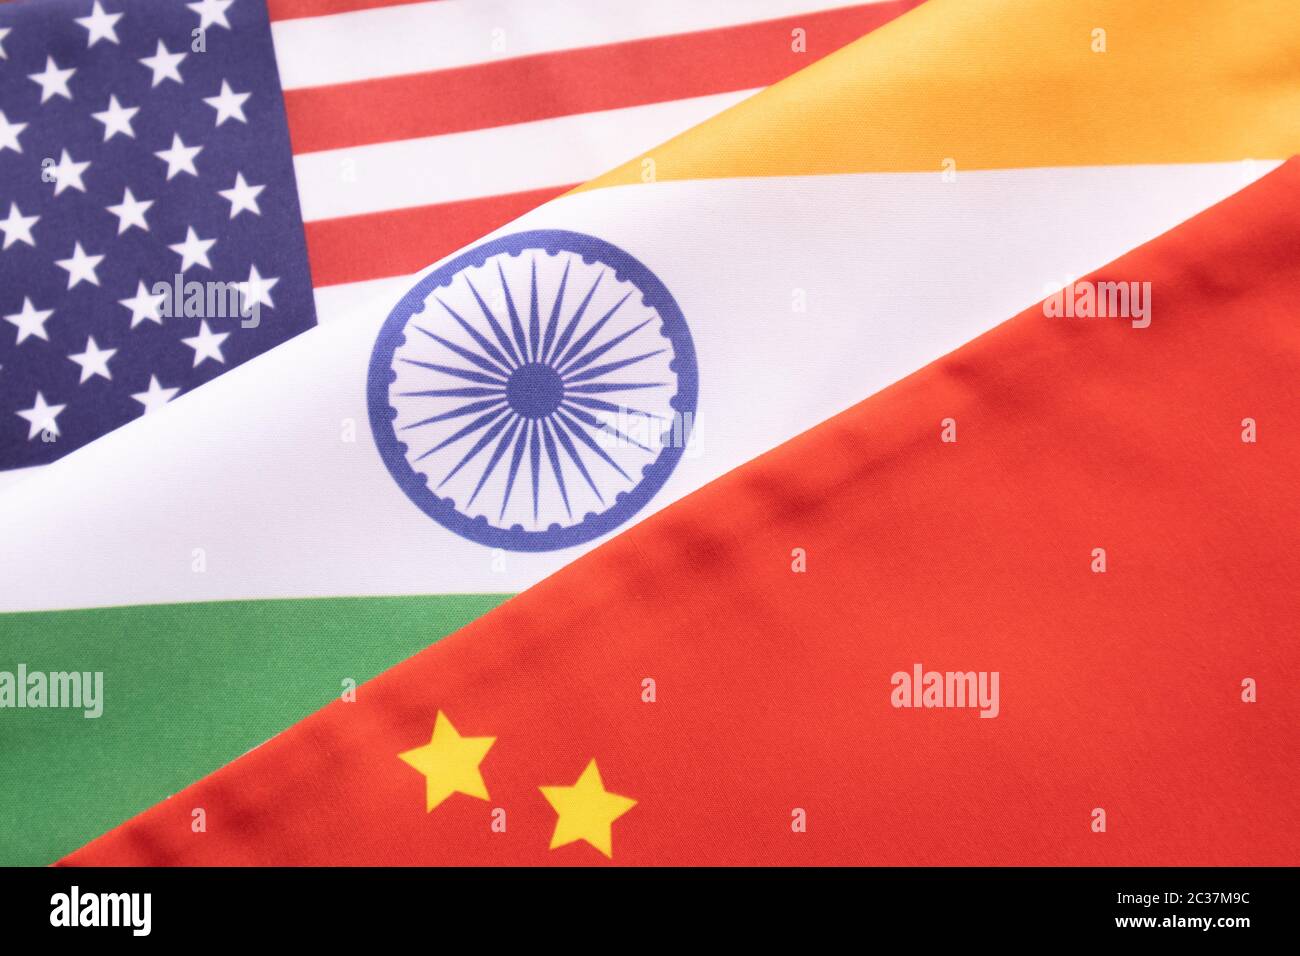 Concept of India, USA, and China relations showing with flags. Stock Photo